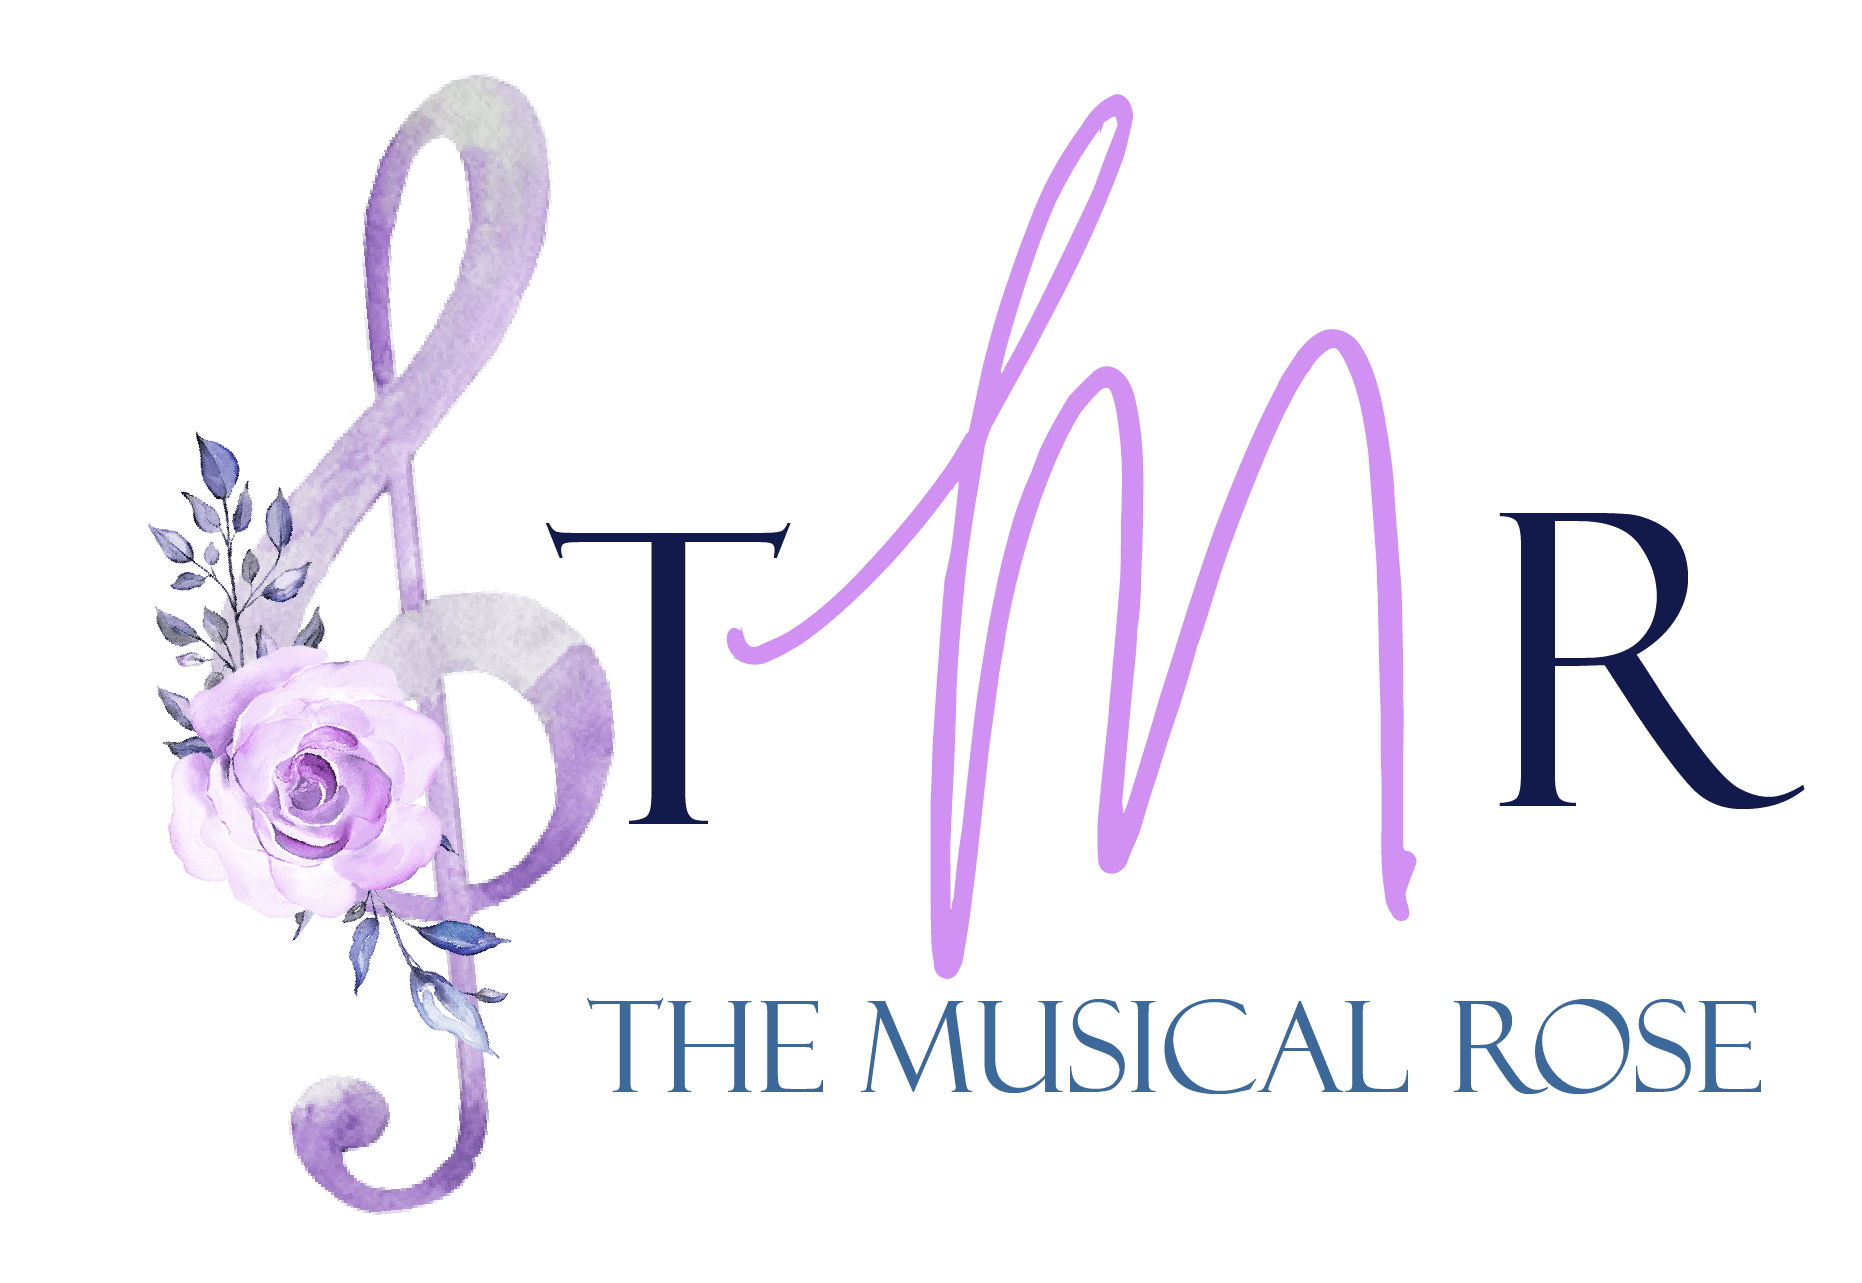 The Musical Rose